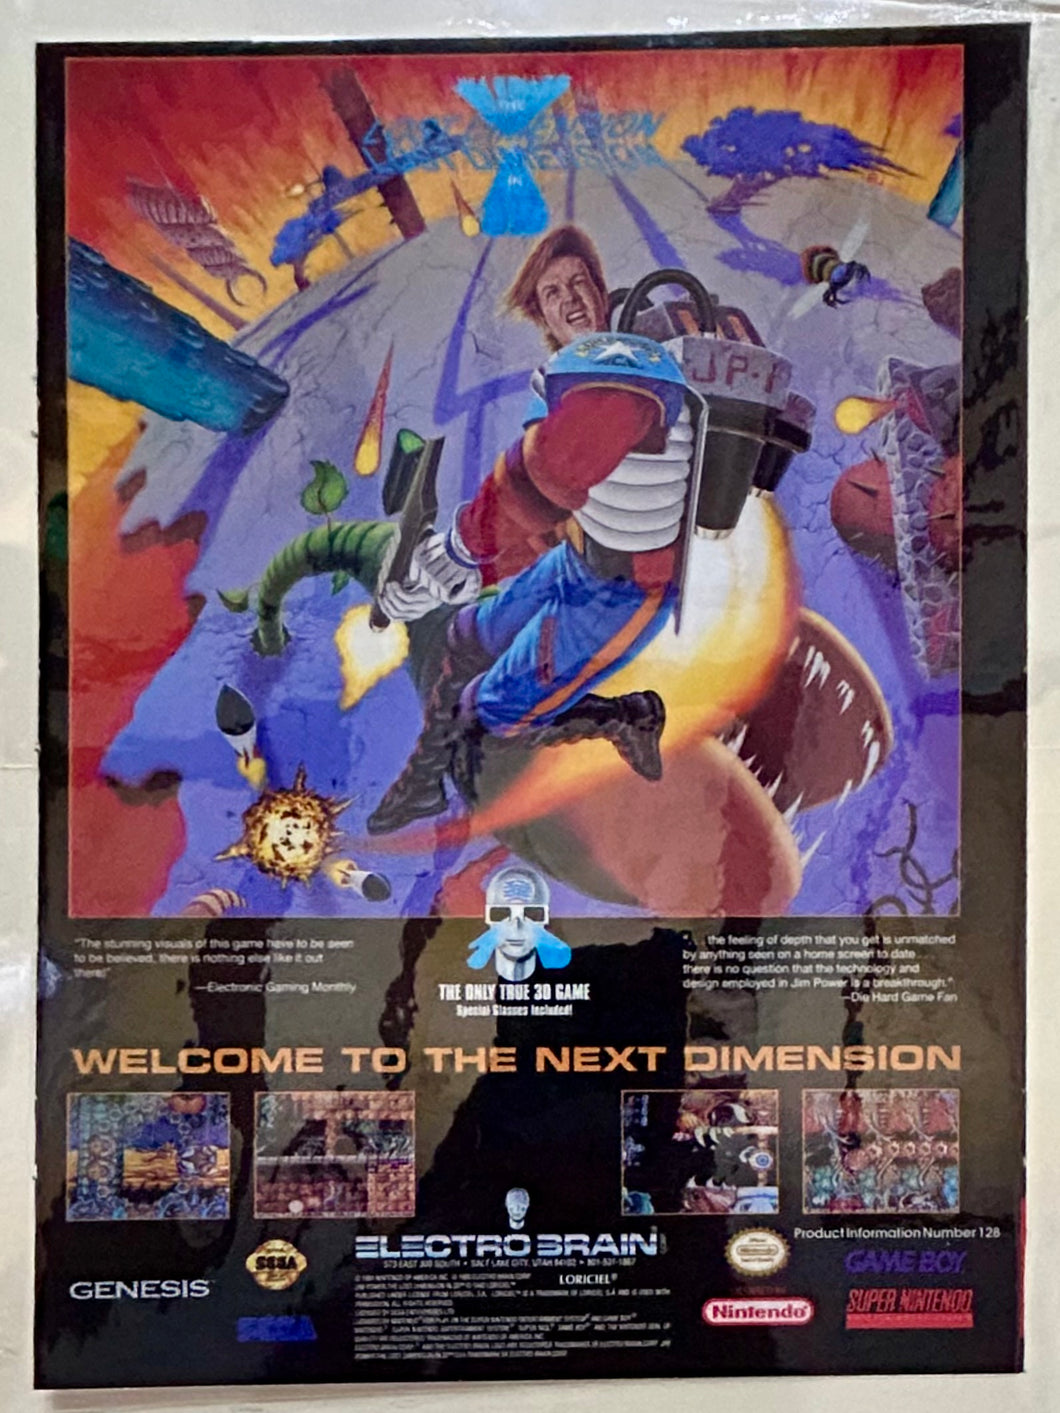 Jim Power: The Lost Dimension in 3-D - SNES GB Genesis - Original Vintage Advertisement - Print Ads - Laminated A4 Poster